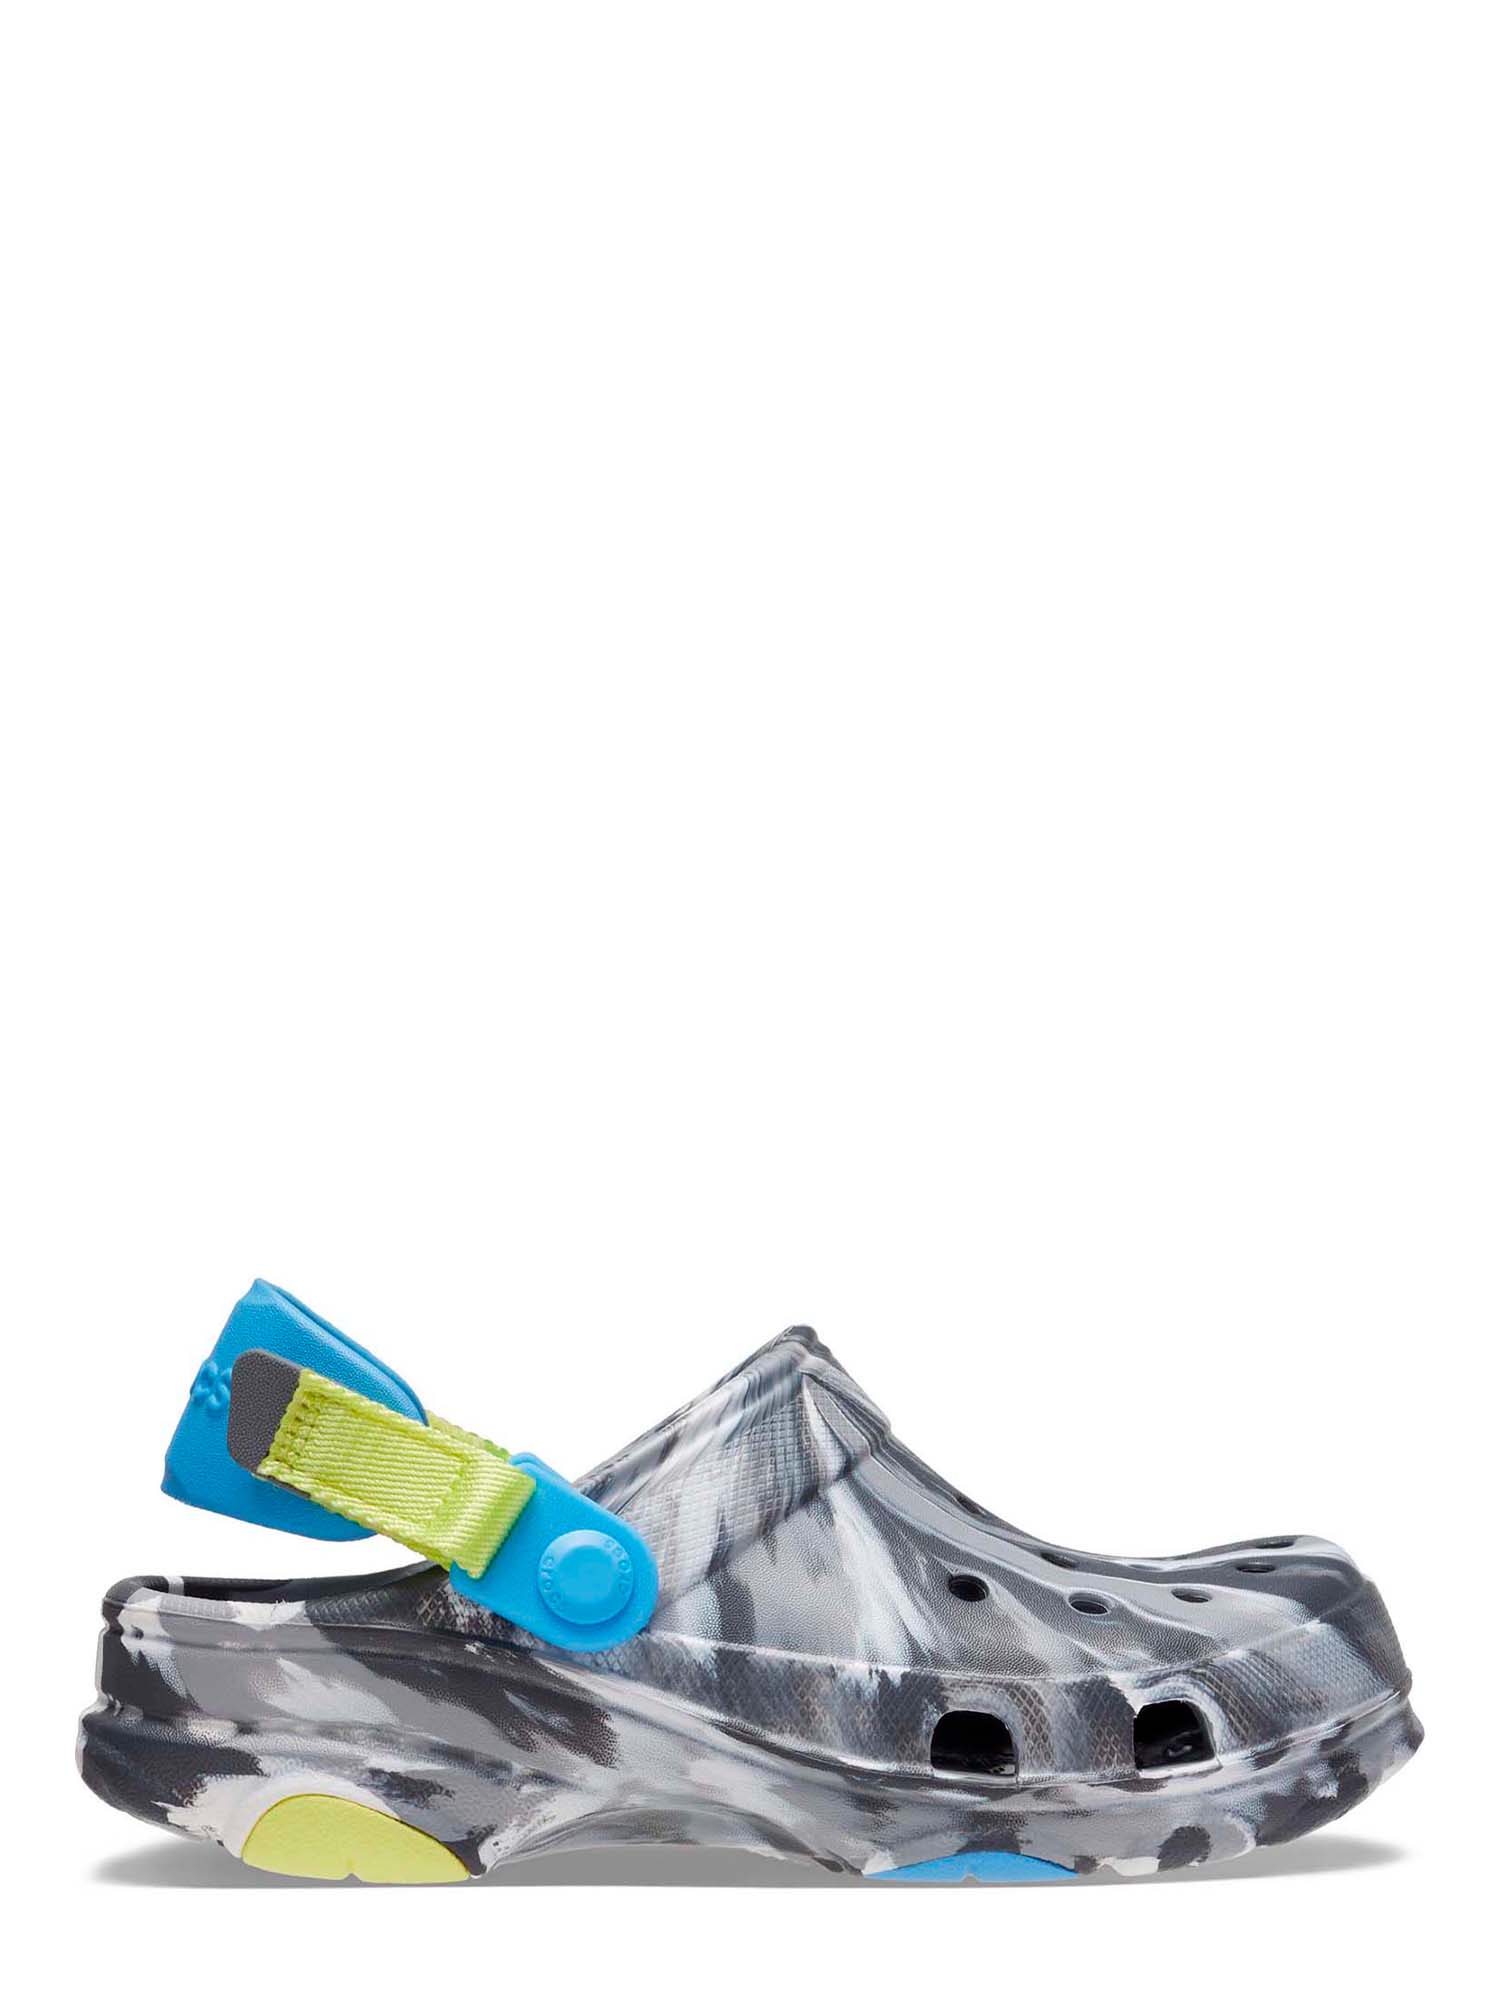 Crocs Toddler Classic All-Terrain Marbled Clog - image 5 of 6